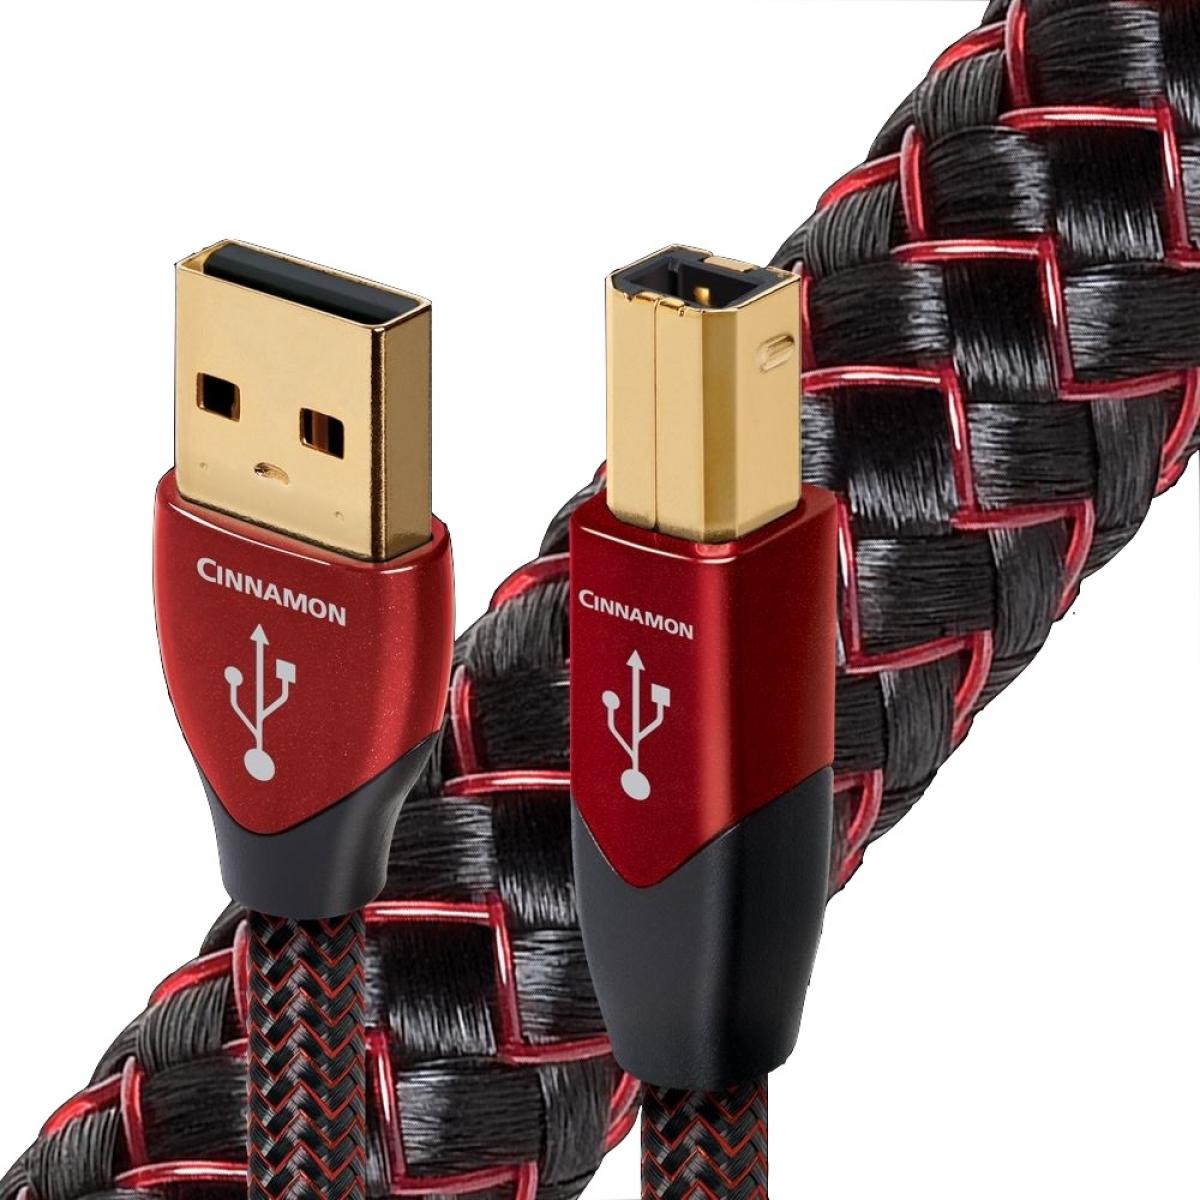 USB Cables AudioQuest Cinnamon USB A to USB B Cable